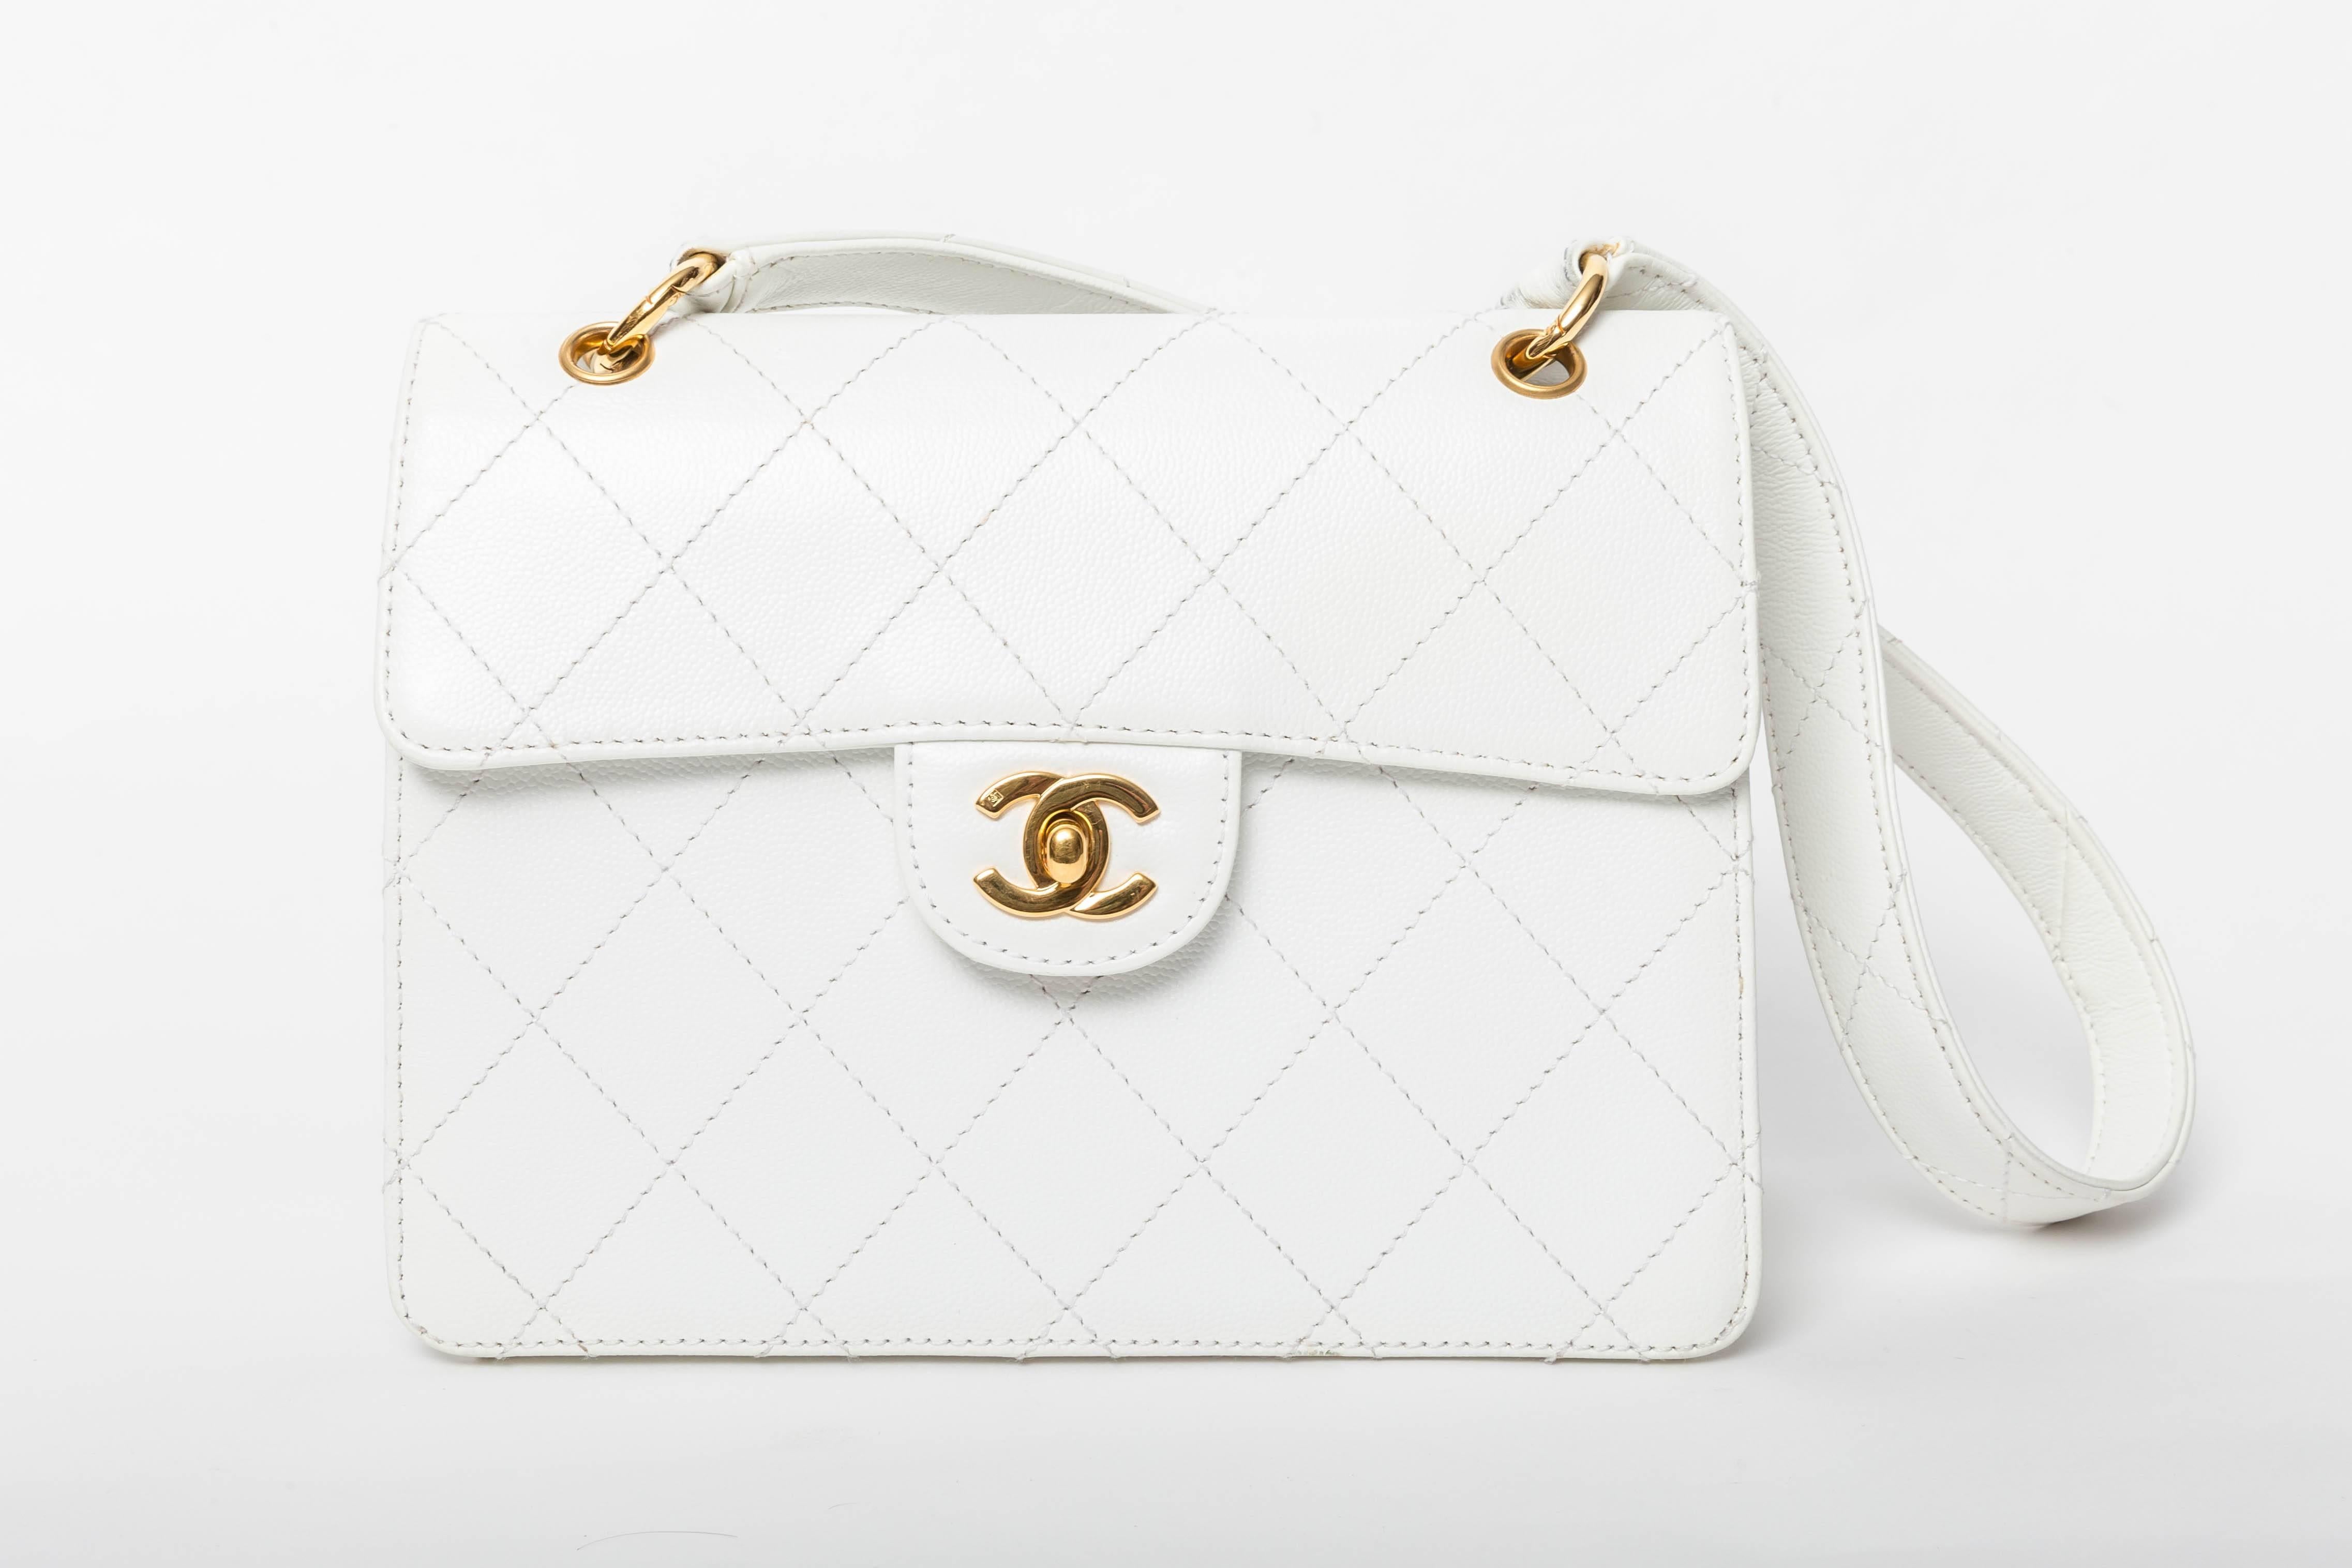 Chanel Shoulder Bag in White Caviar with Gold Hardware
Hologram Reads 6248041 depicting the years 2000 - 2002
Condition is Excellent
Shoulder Strap Drop is 10 Inches
